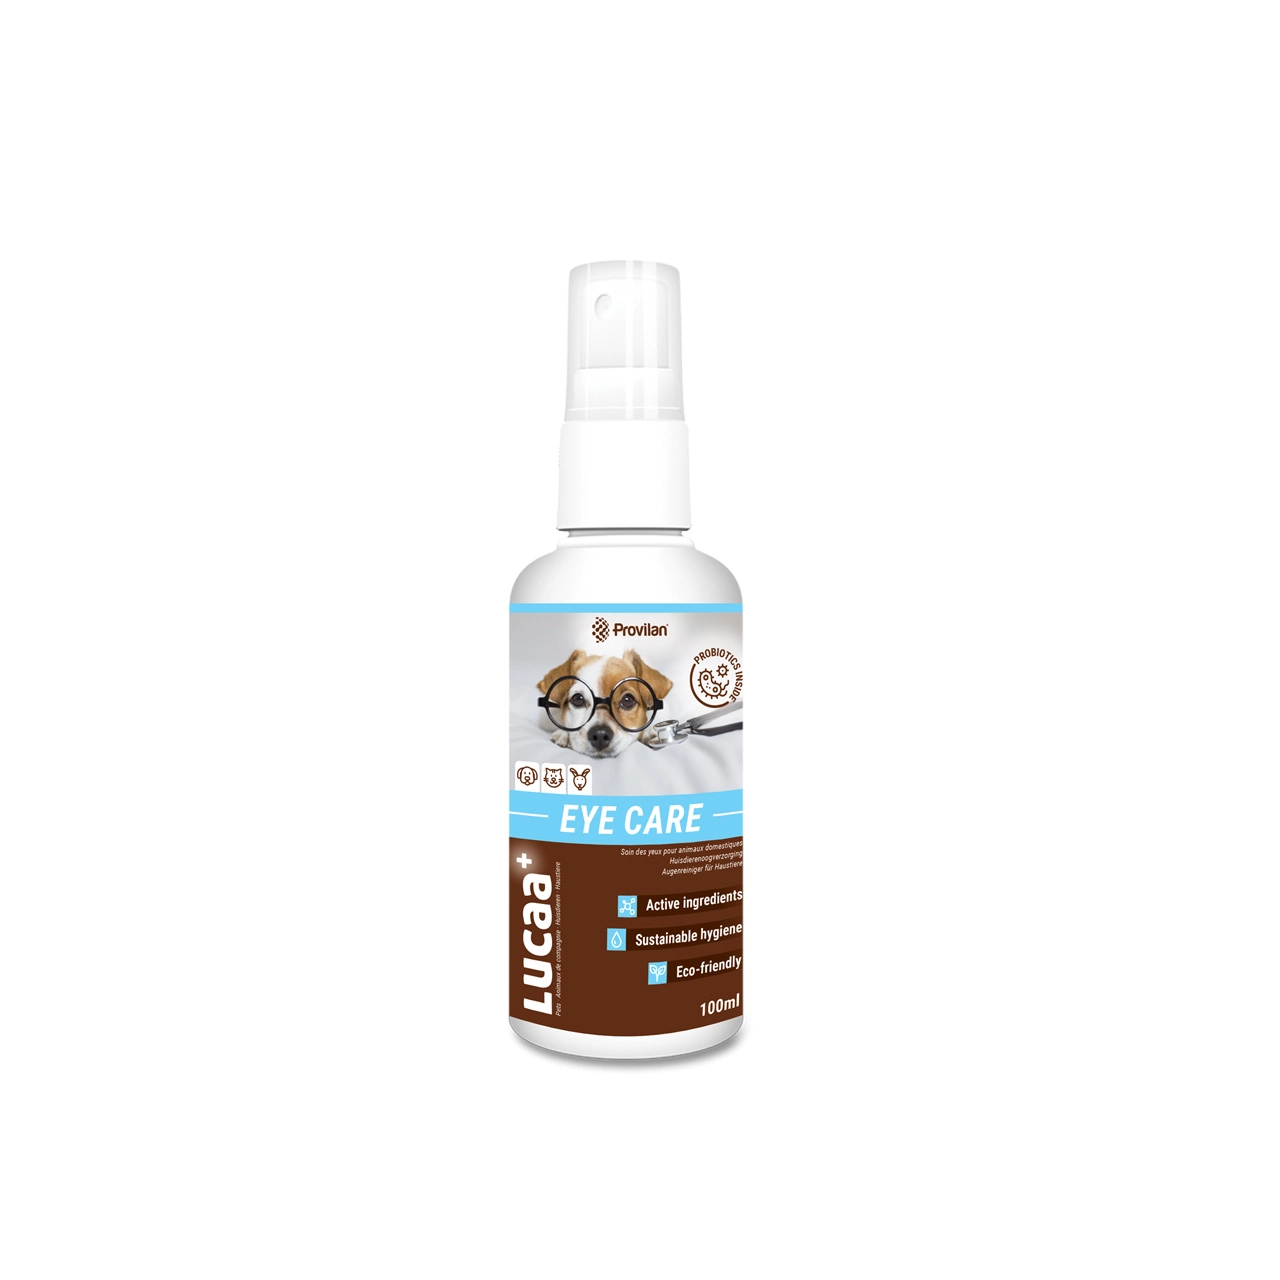 Lucaa+ nettoyant oculaire pour animaux domestiques 100ml